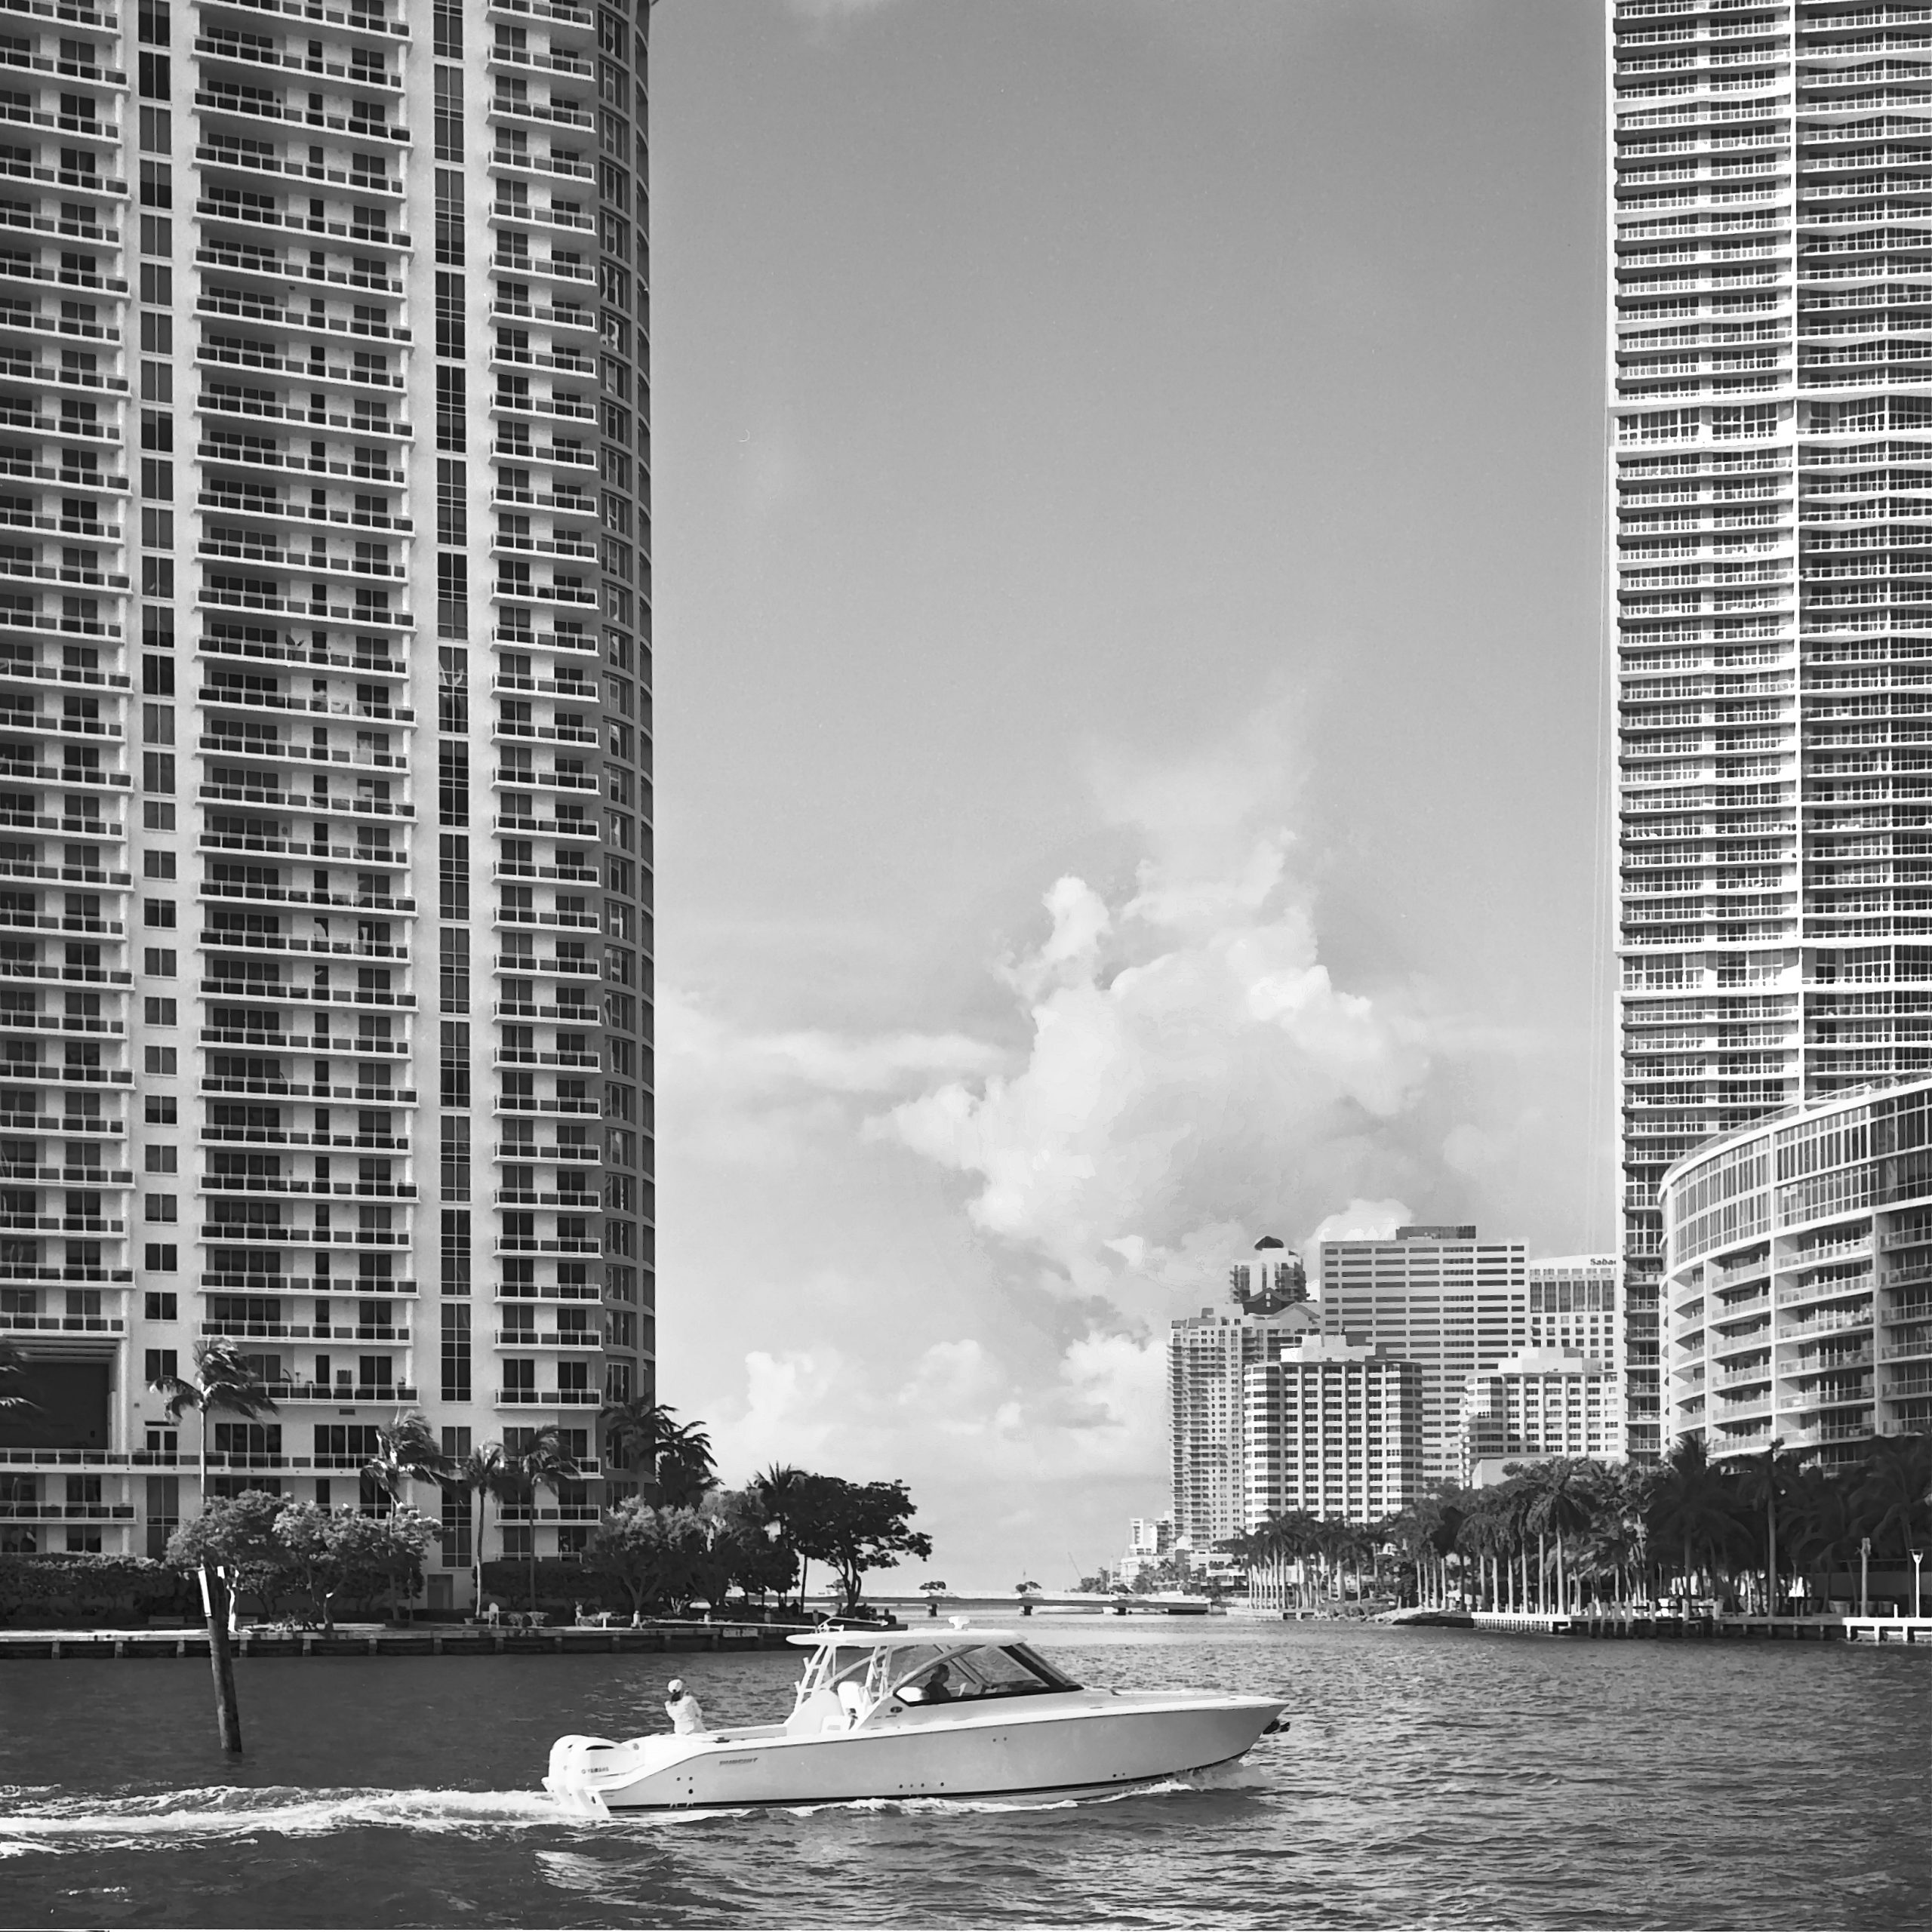 Appartment buildings and a recreational boat on the Miami River, Florida. Captured on Film